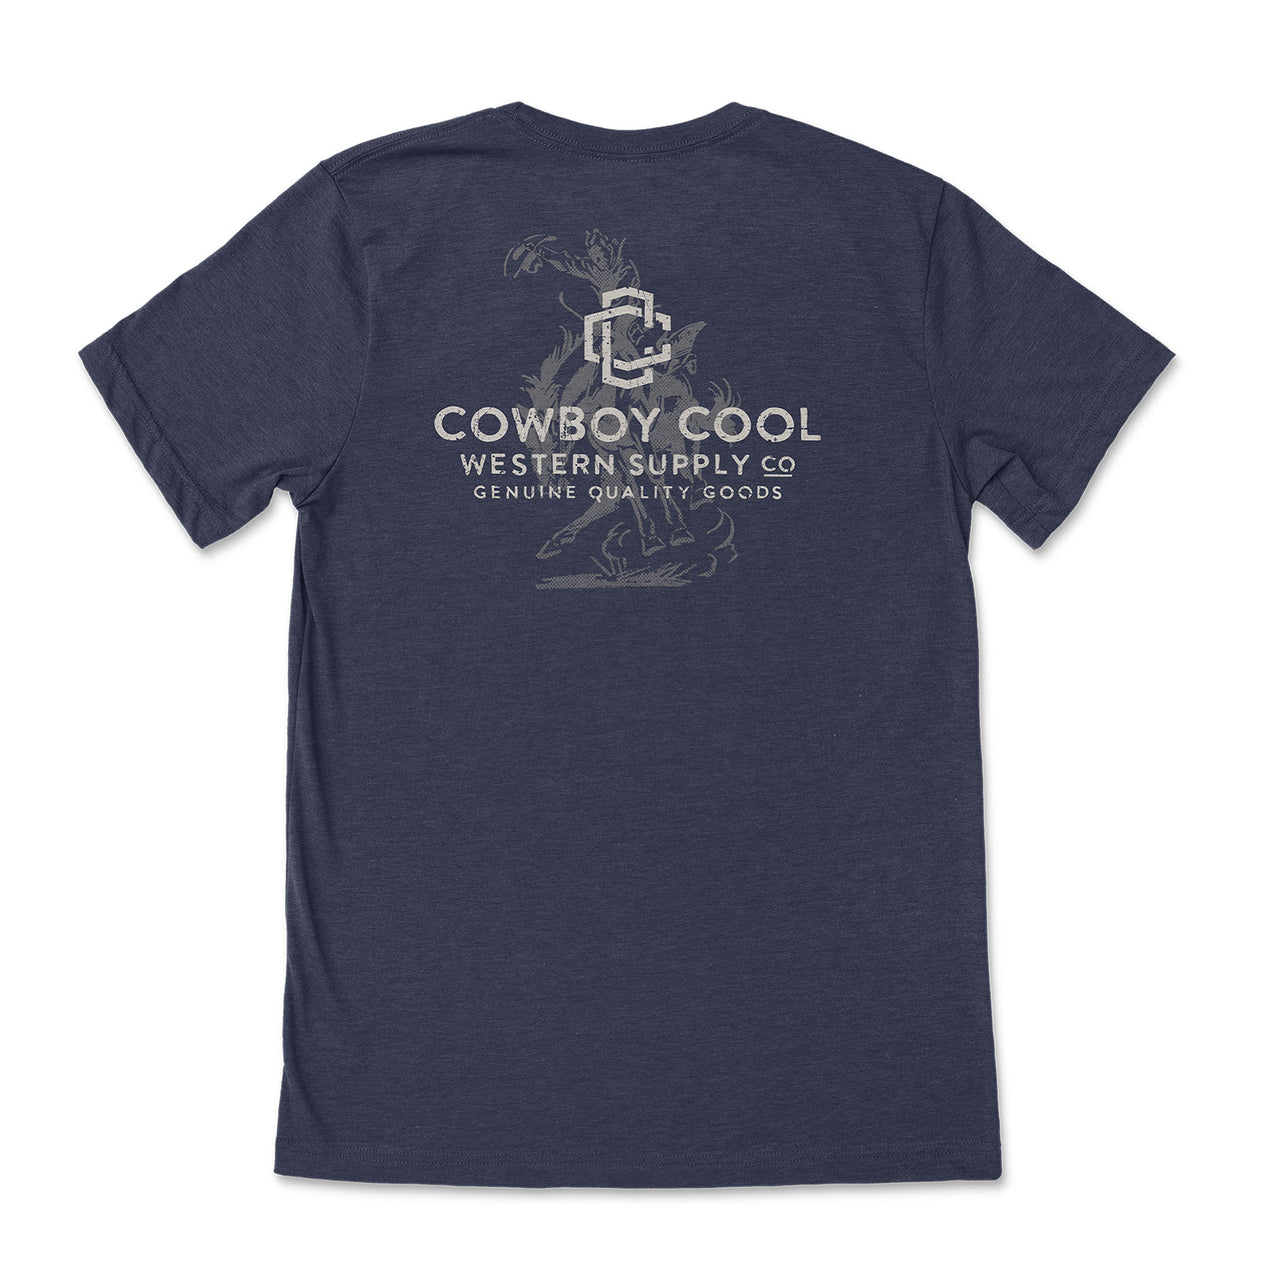 Cowboy Cool Tip of the Hat T-Shirt